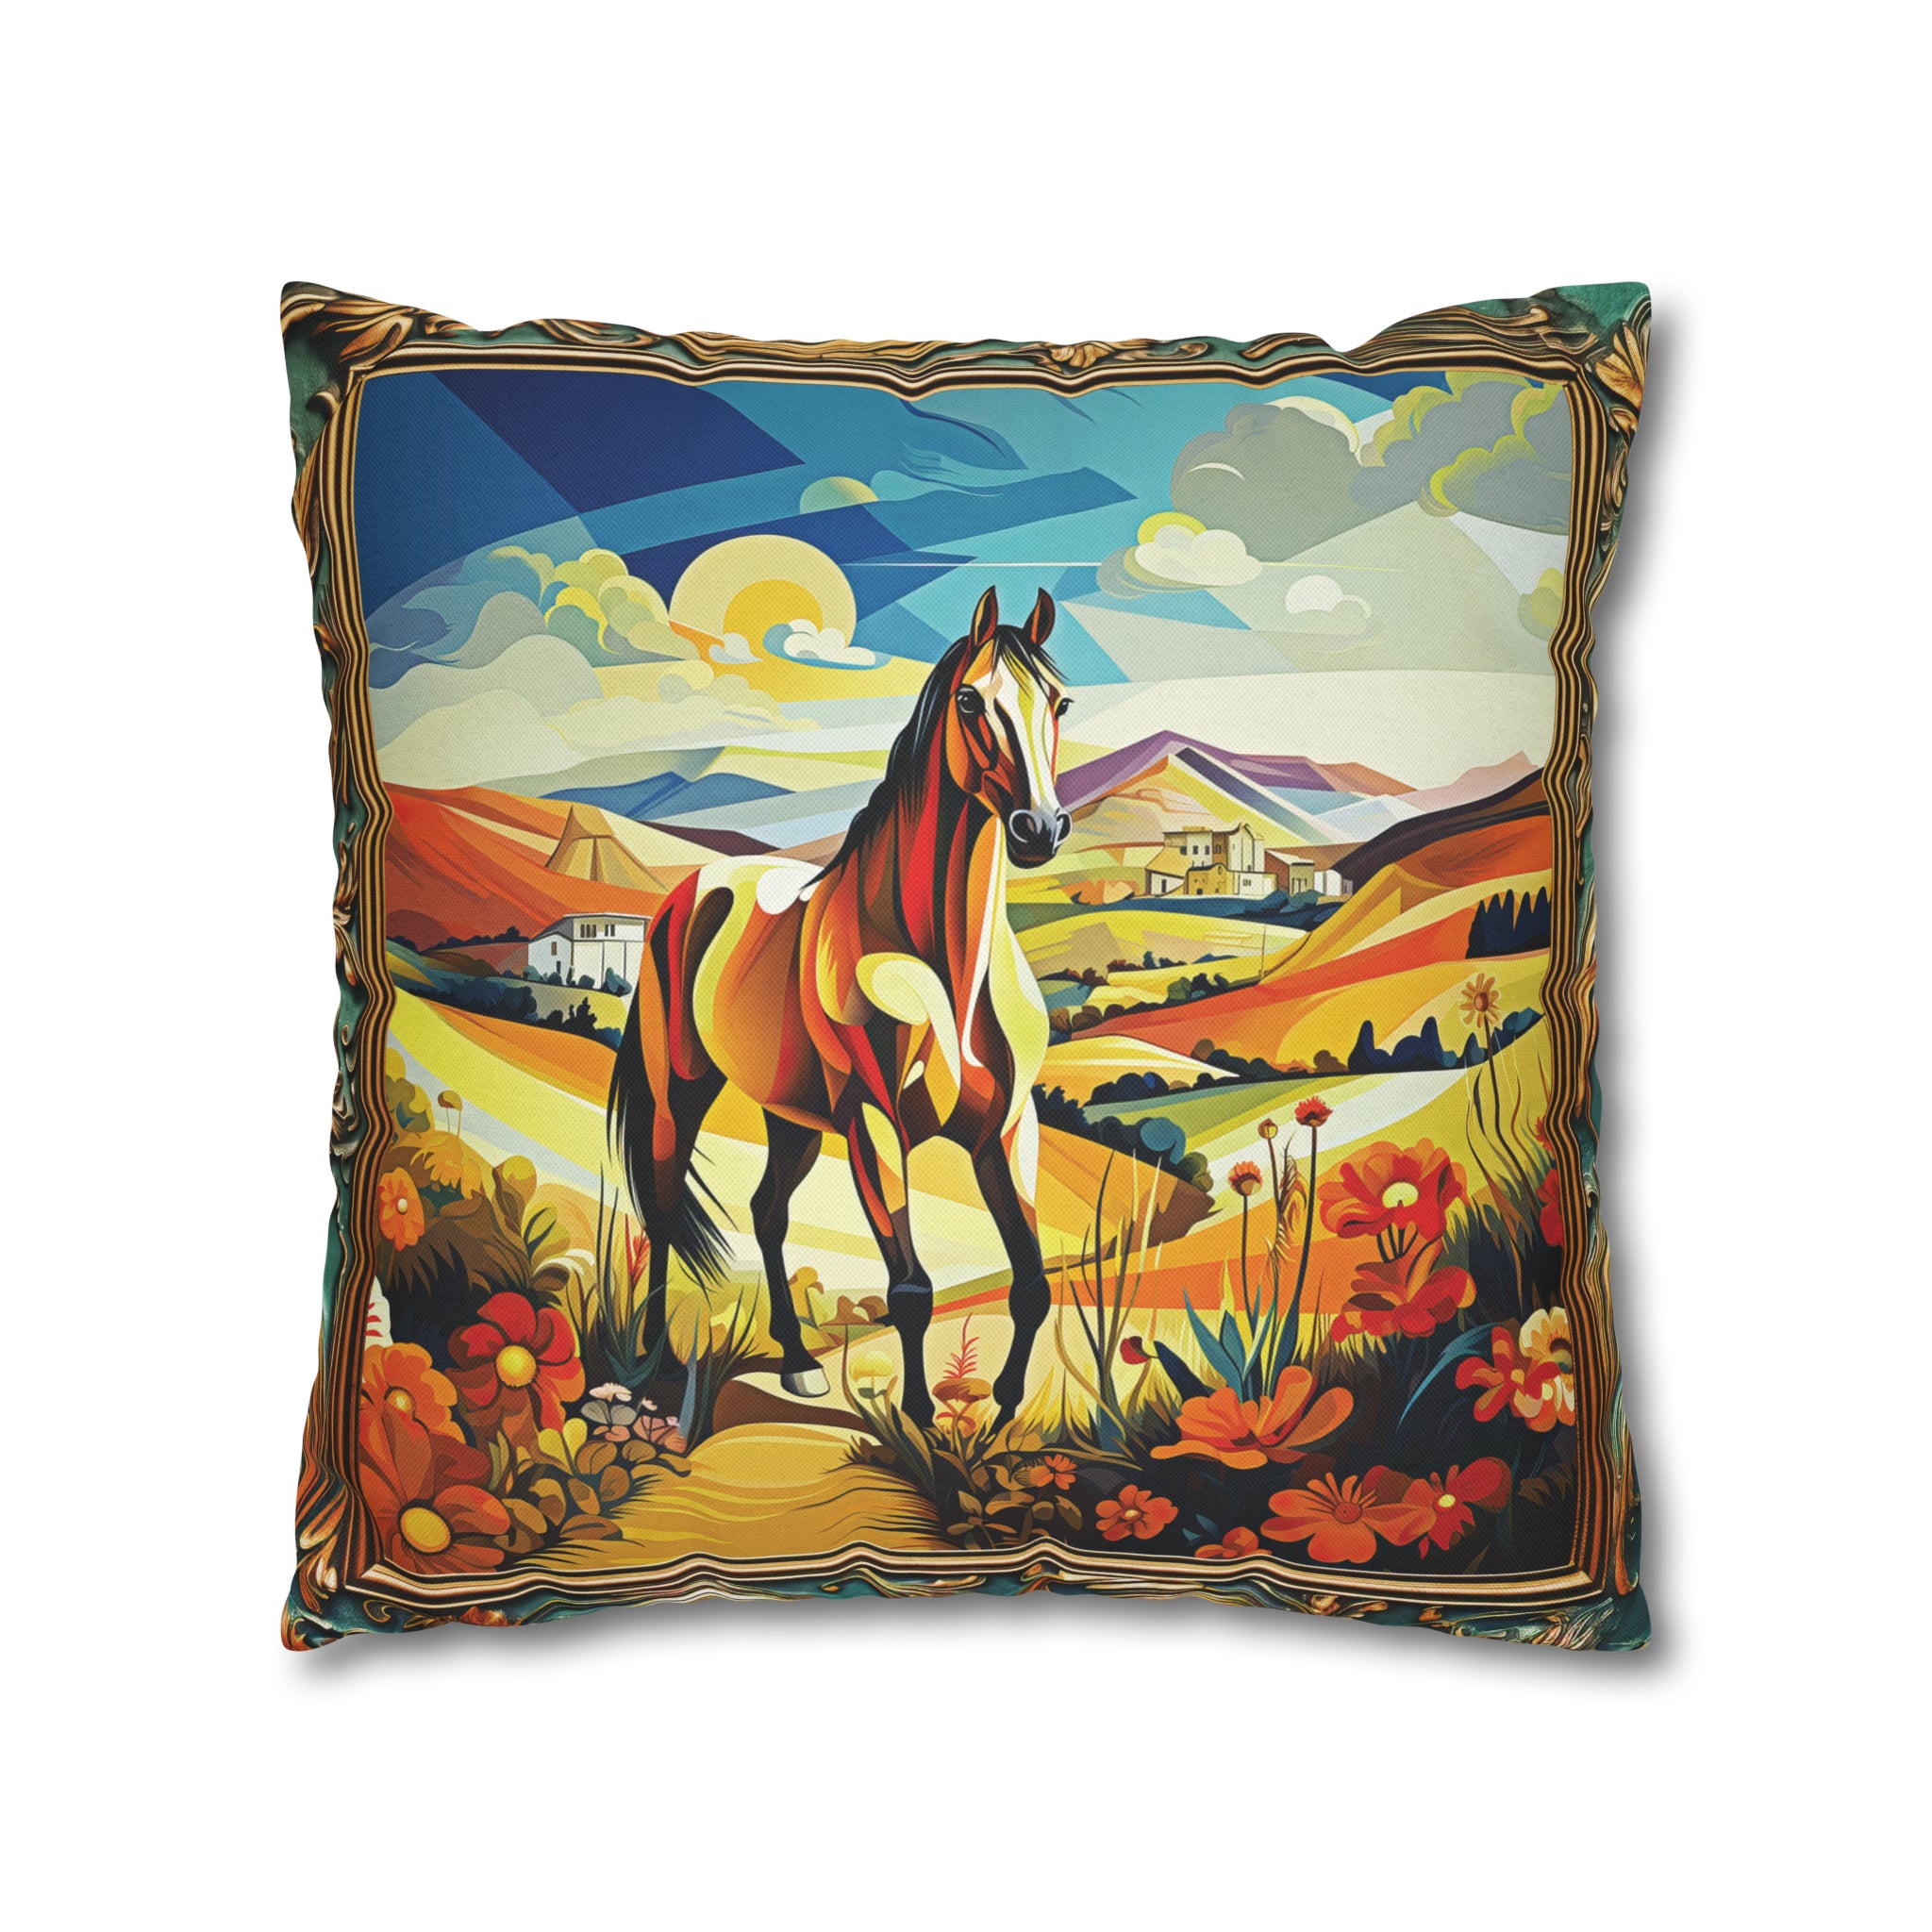 Square Pillow Case 18" x 18", CASE ONLY, no pillow form, original Art ,Colorful, A beautiful Golden Horse on a Golden Landscape with a Village in the Distance